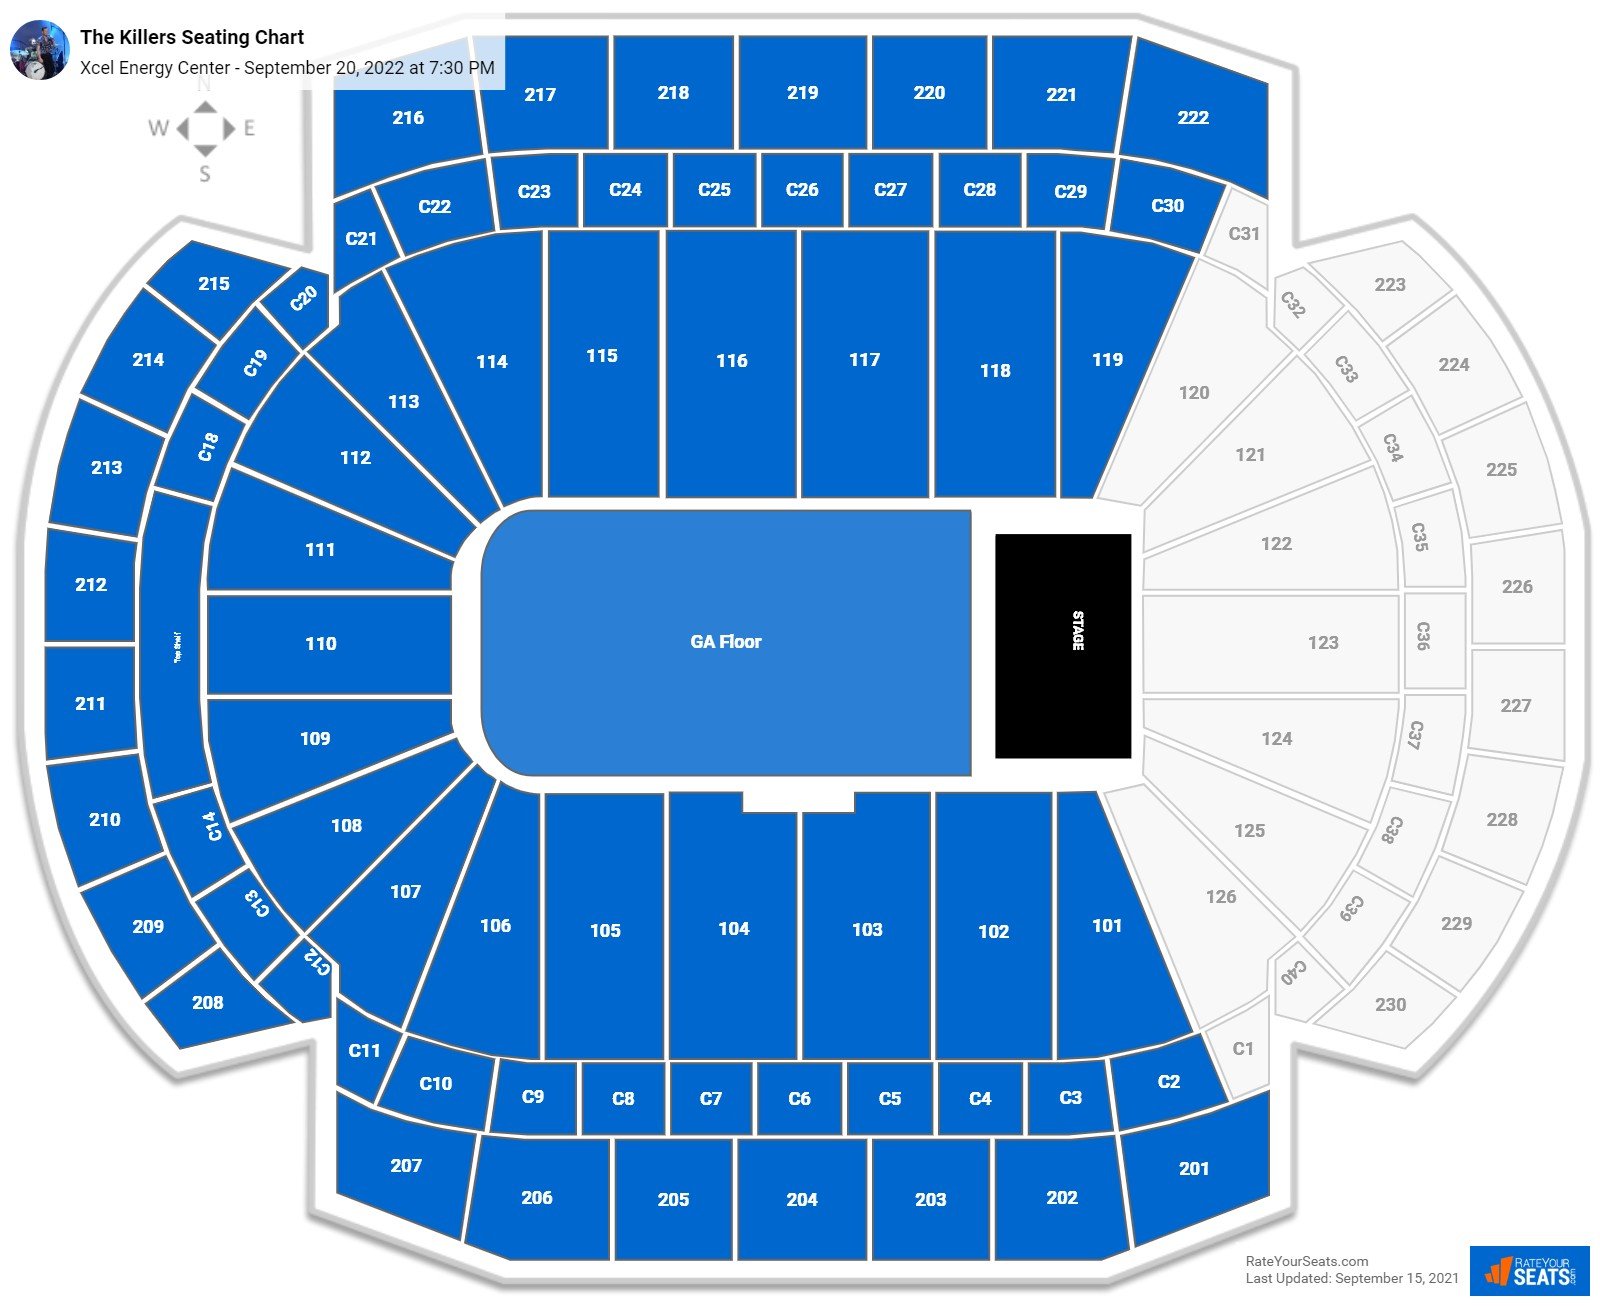 Xcel Energy Center Seating Charts for Concerts